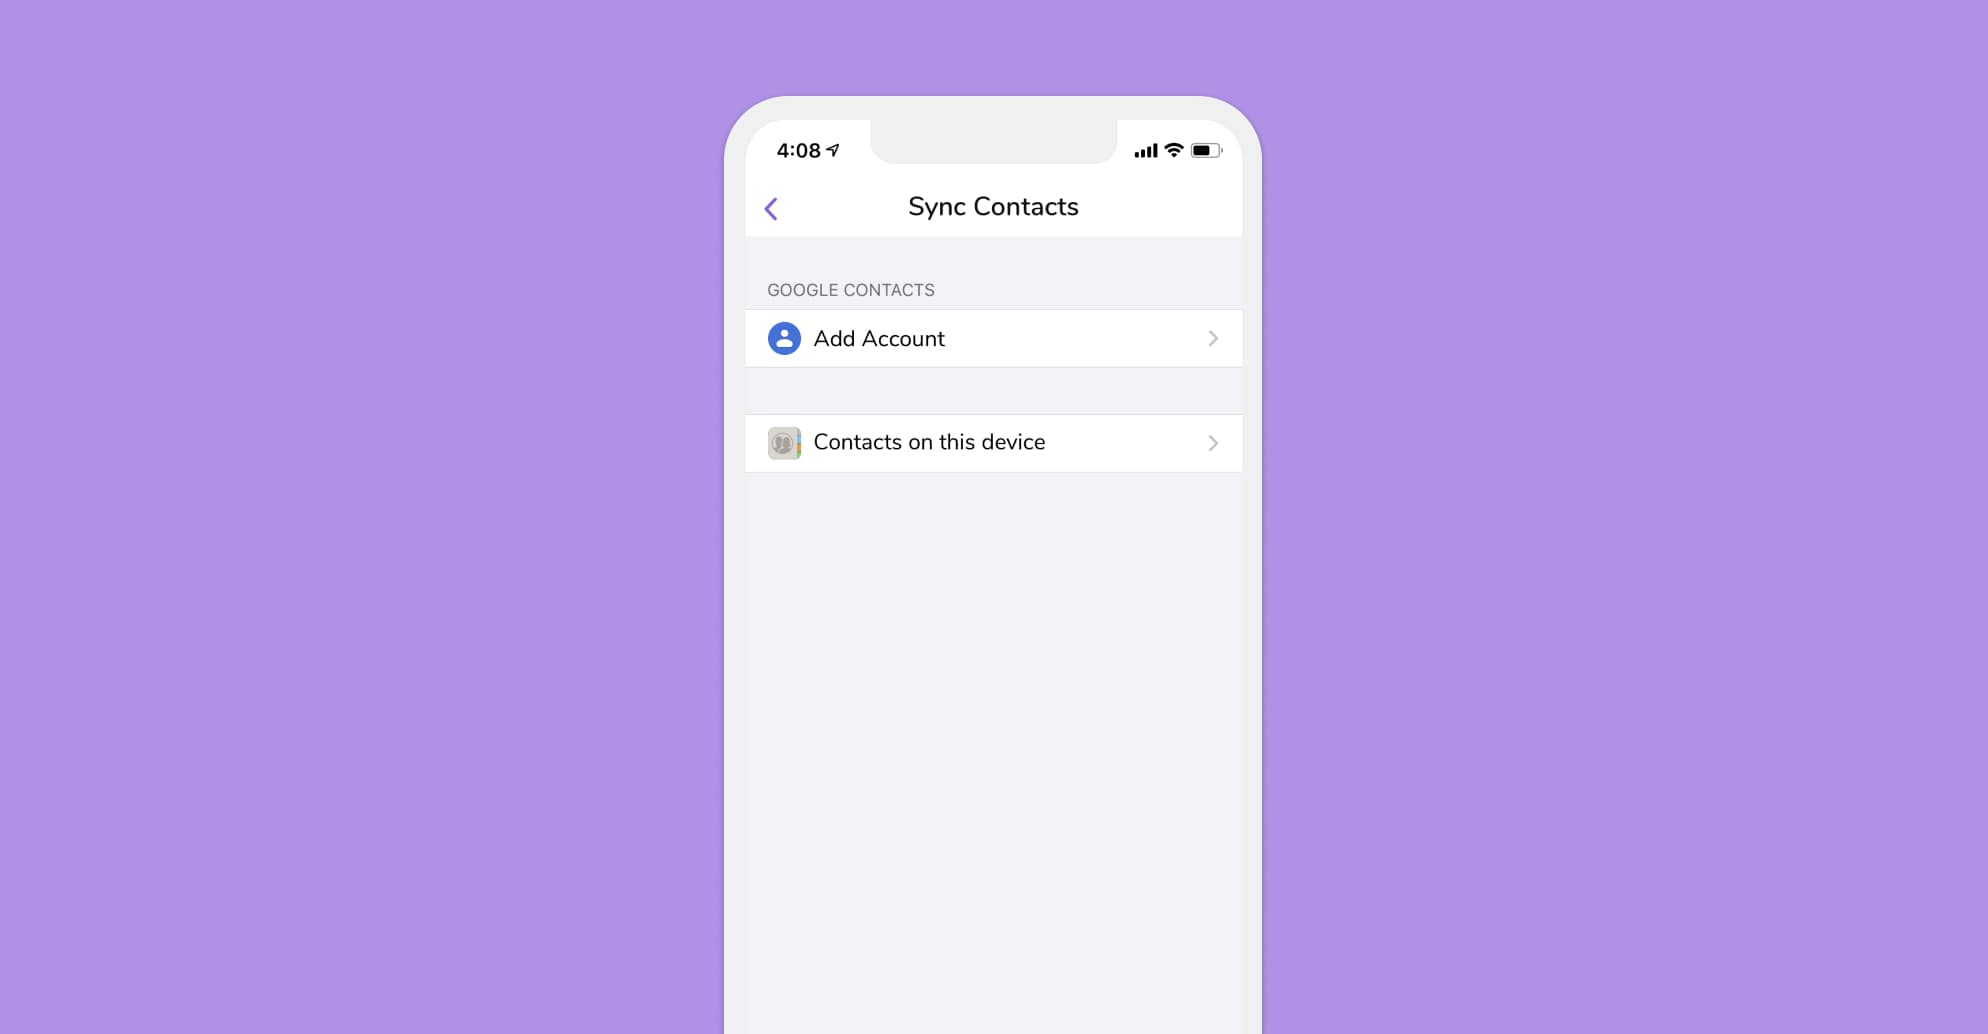 In your HiHello Settings you can add a Google account to sync your contacts with.